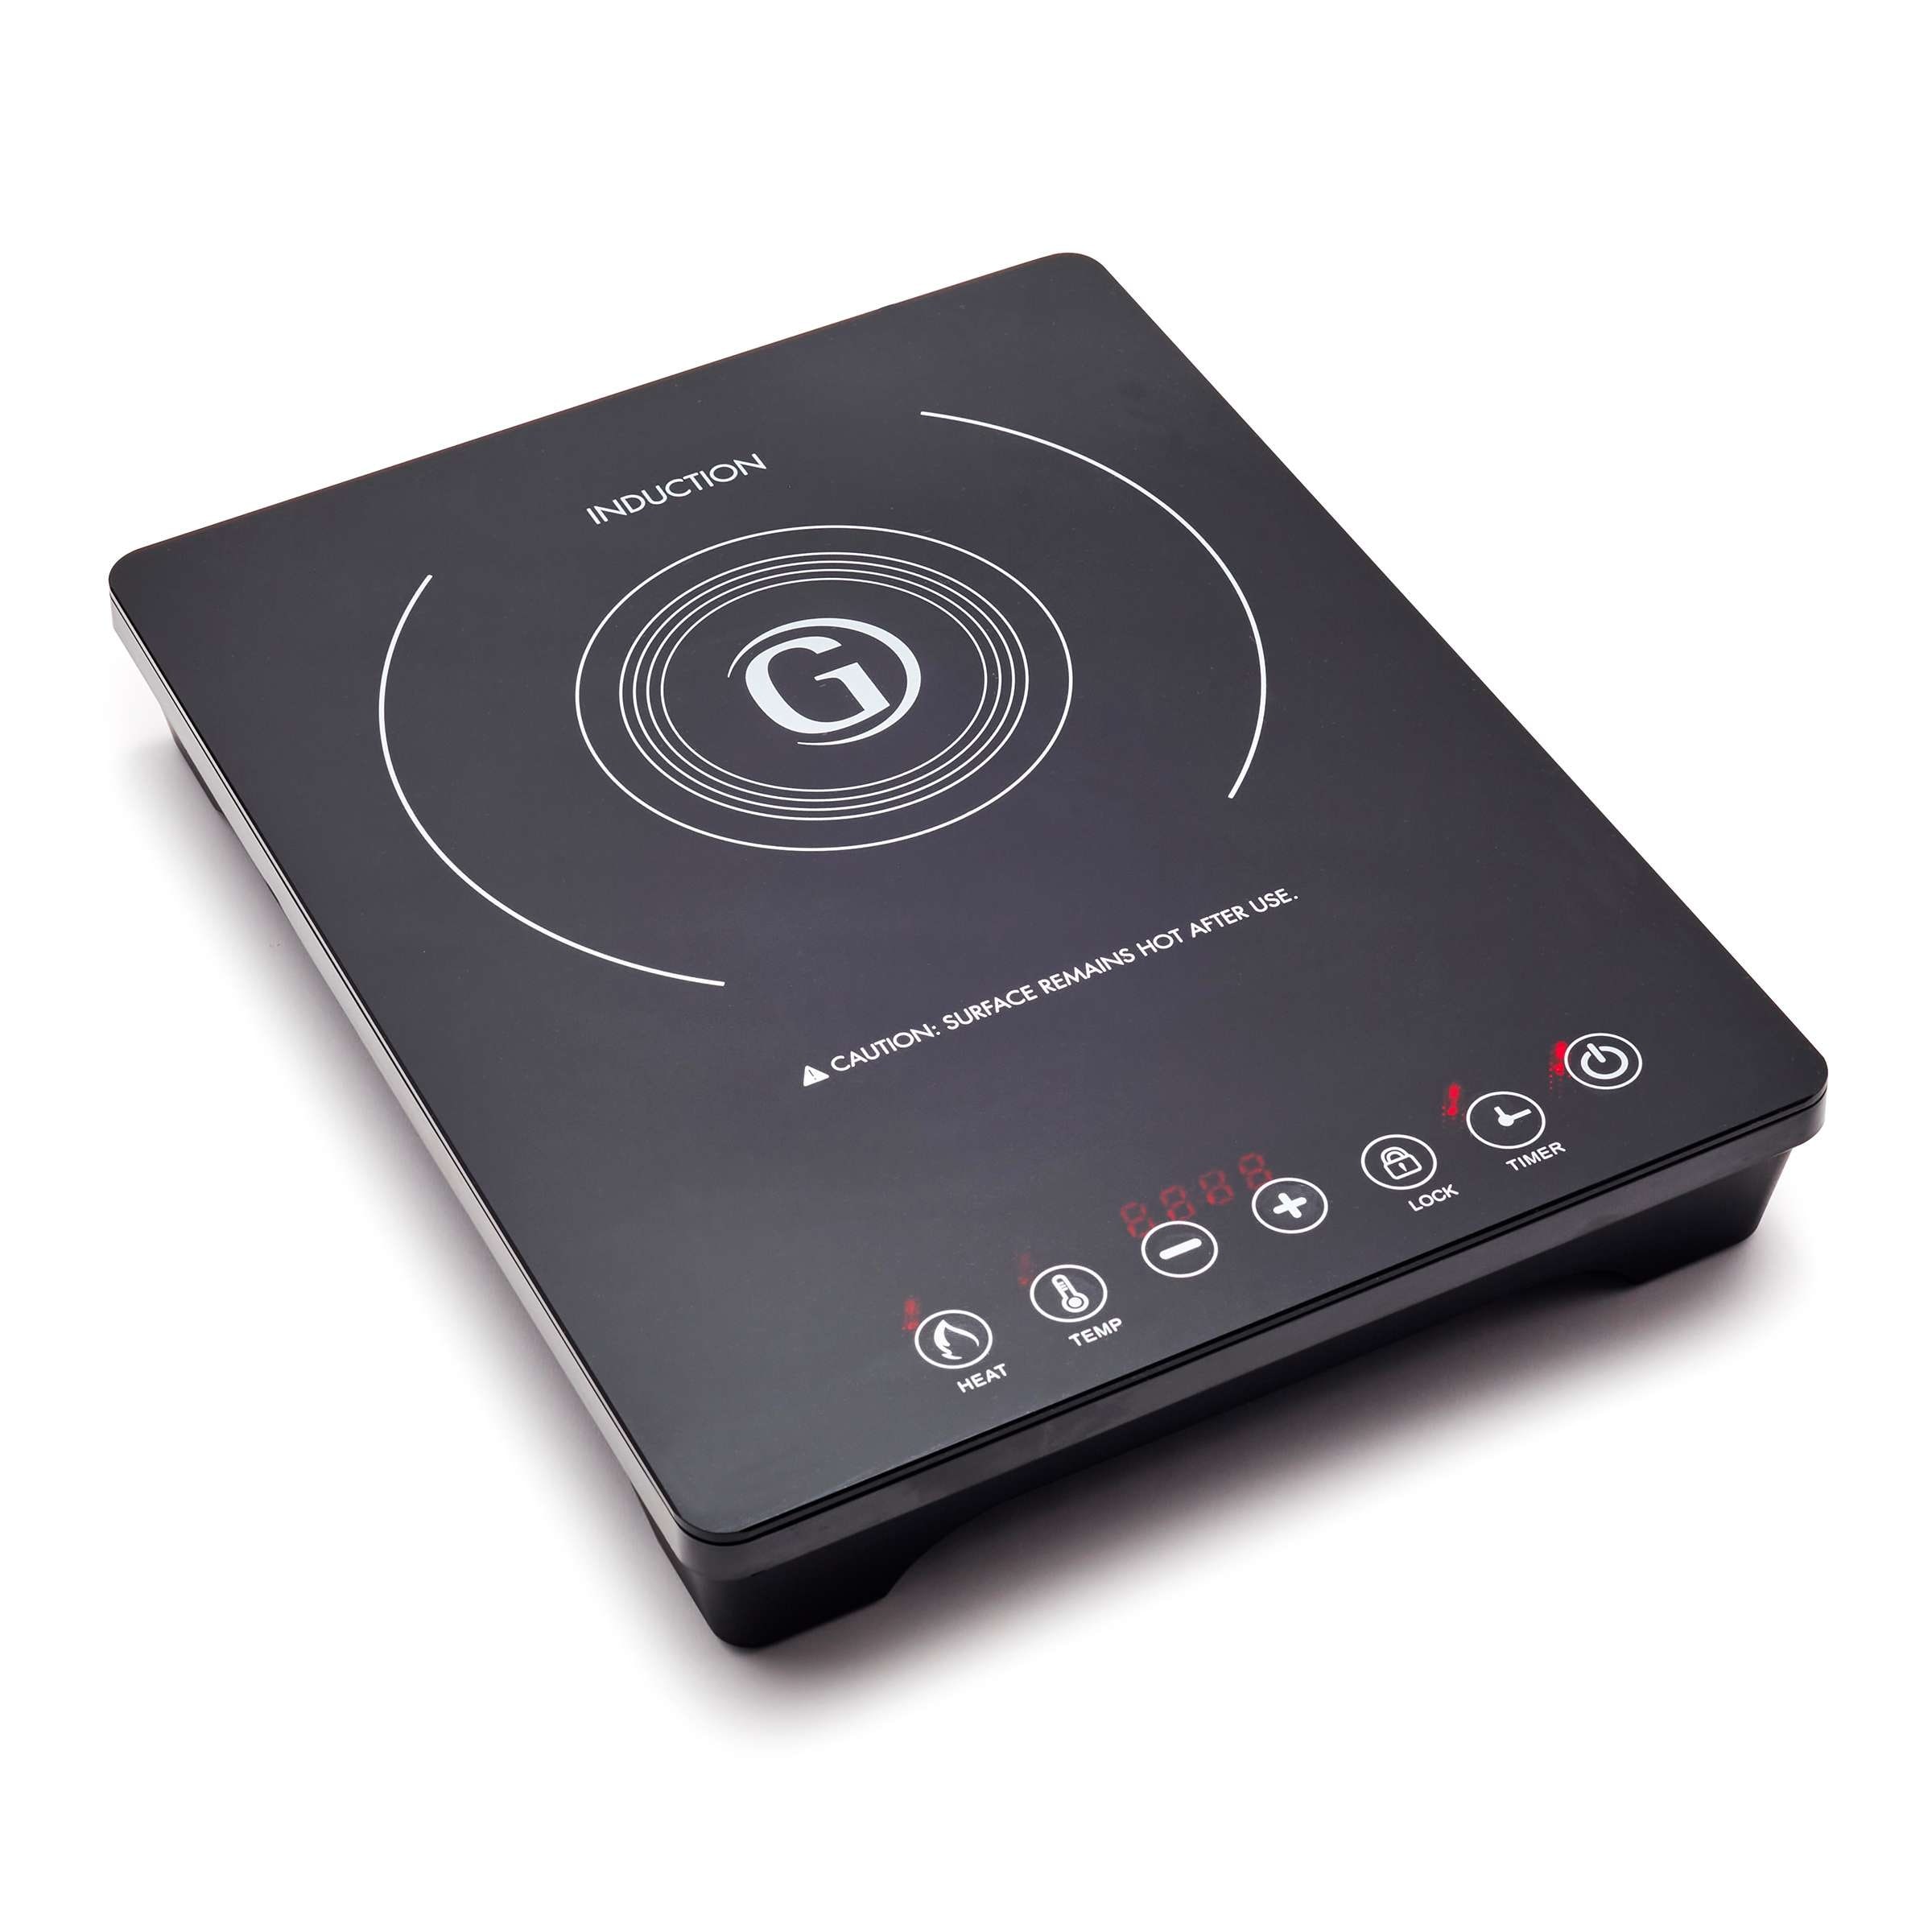 https://ak1.ostkcdn.com/images/products/is/images/direct/d28f921d4b8607e70e4a592e1a5dd265fb3809c0/GreenPan-Portable-Induction-Cooktop.jpg